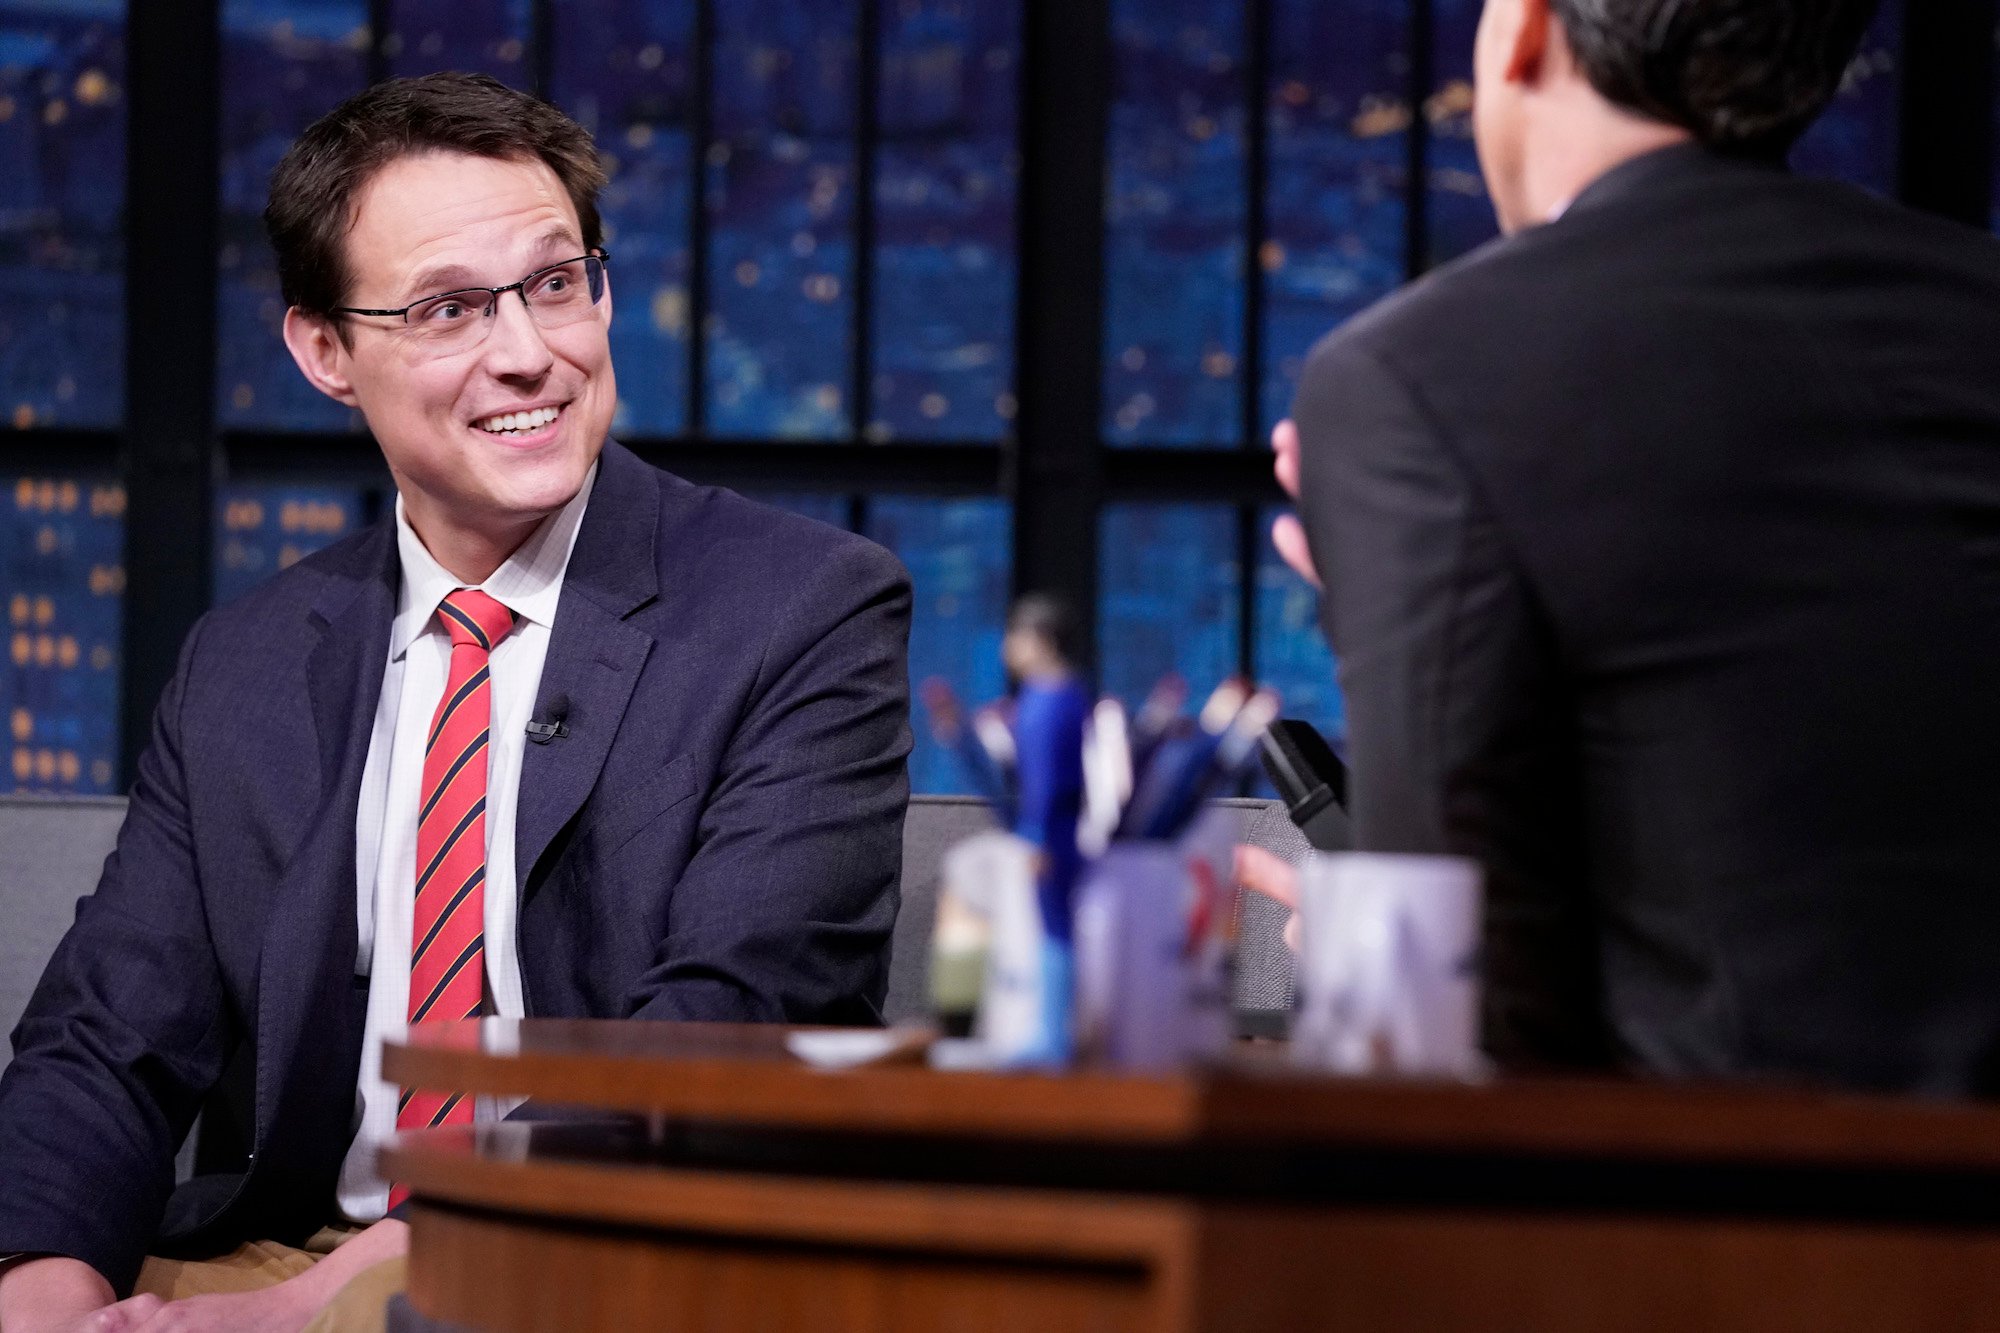 Steve Kornacki Felt a ‘Little Squeamish’ With Some Memes About Him